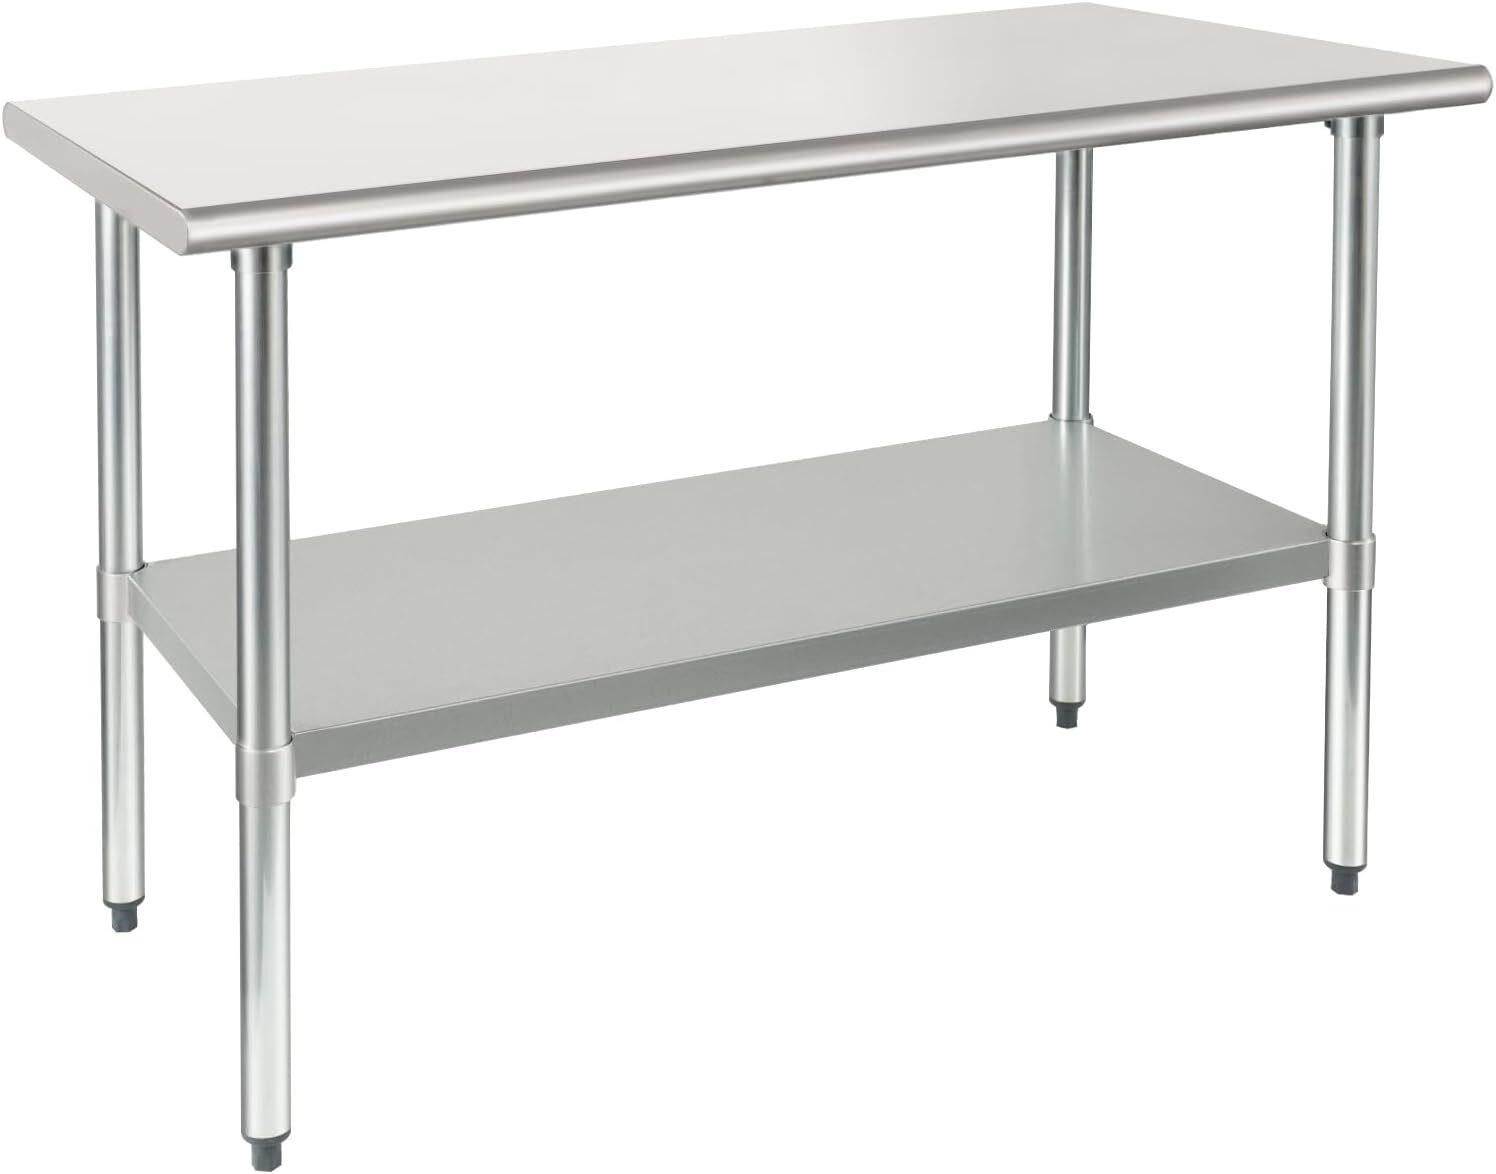 HARDURA Stainless Steel Table 24X48 Inches